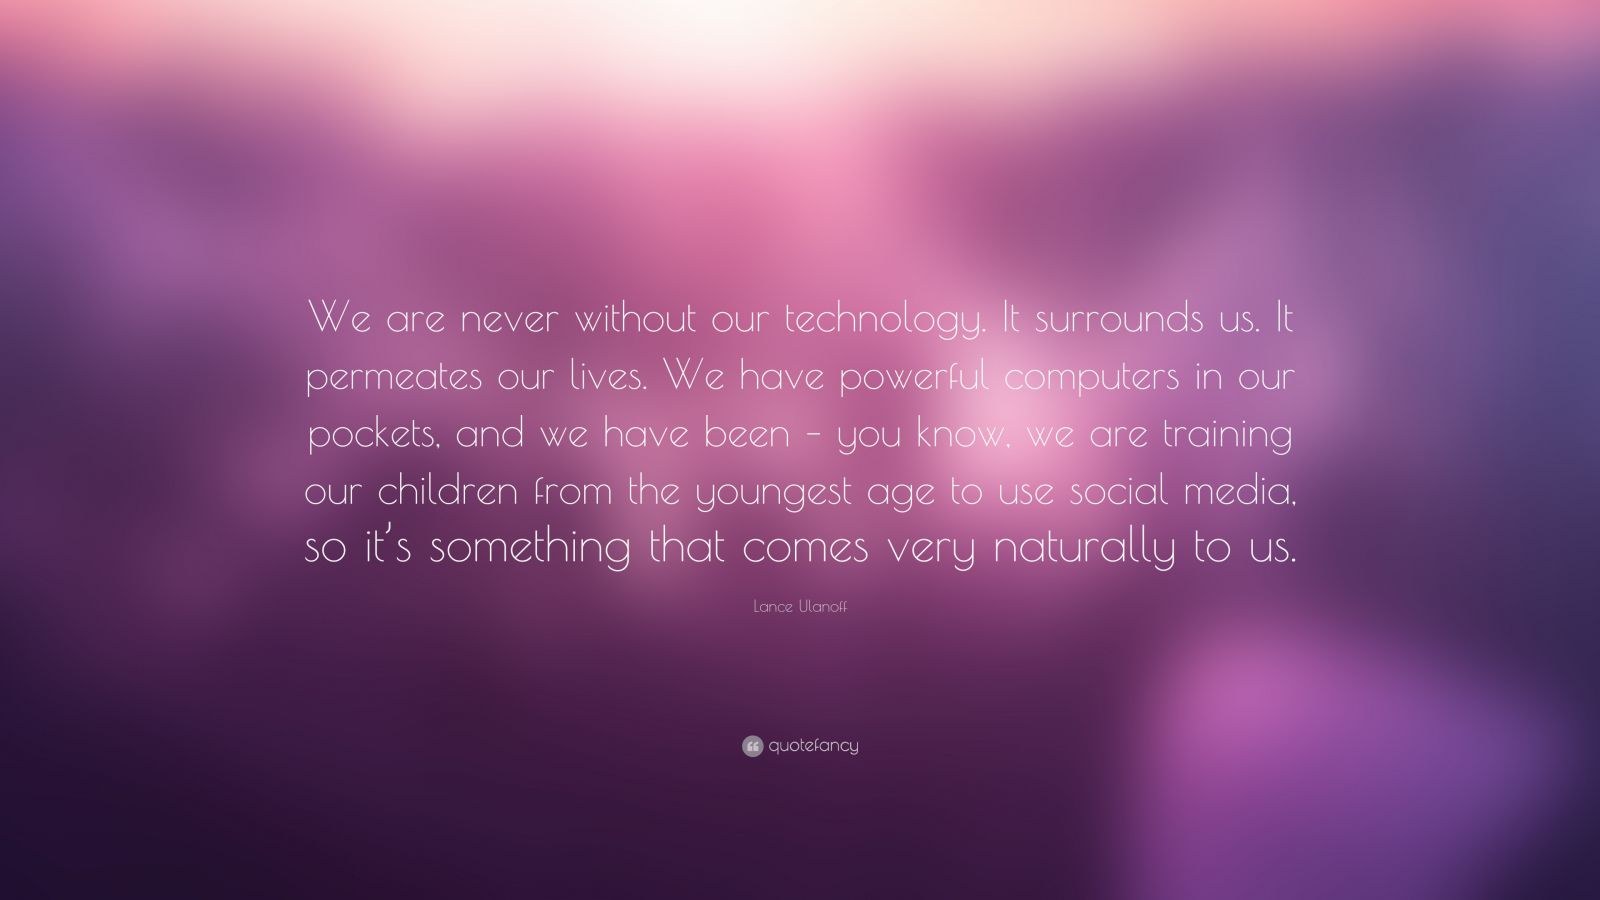 Lance Ulanoff Quote: “We are never without our technology. It surrounds ...